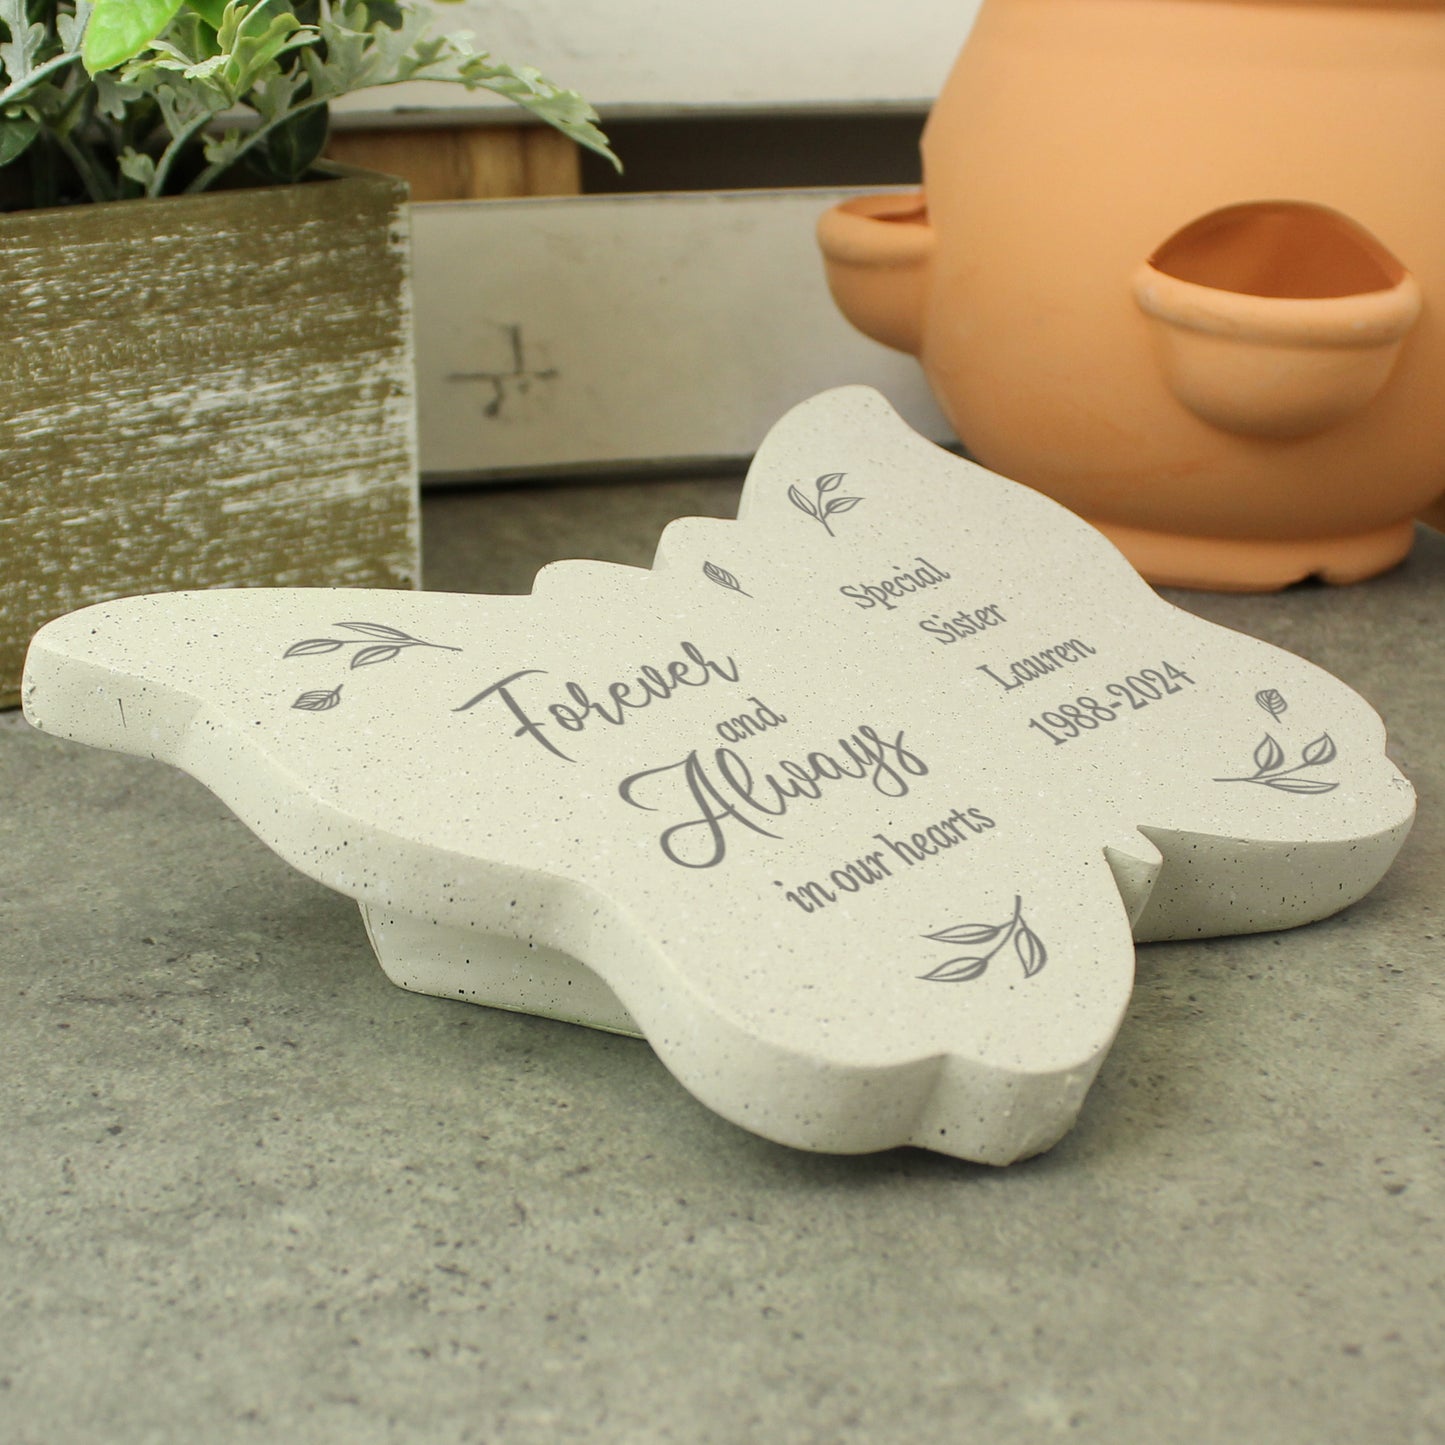 Personalised Memorial Butterfly Grave Marker - Forever and Always